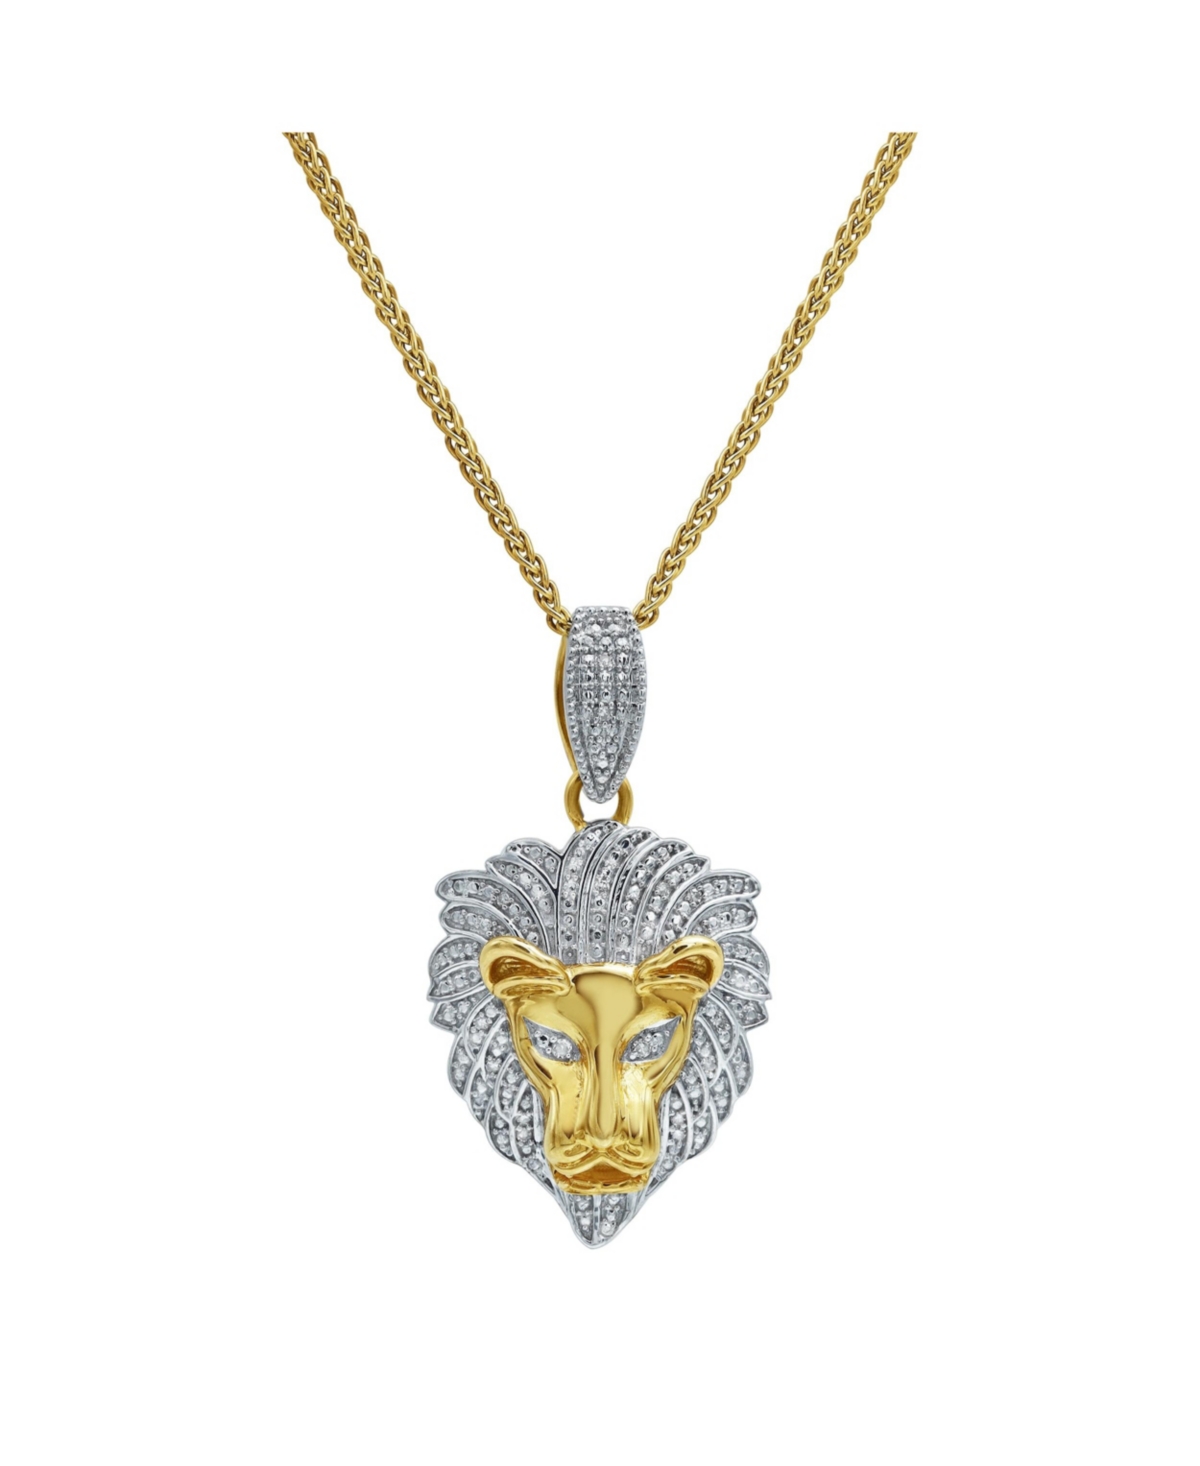 King of the Jungle Natural Round Cut Diamond Pendant(0.09 cttw) in 14k Yellow Gold for Women & Men - Yellow